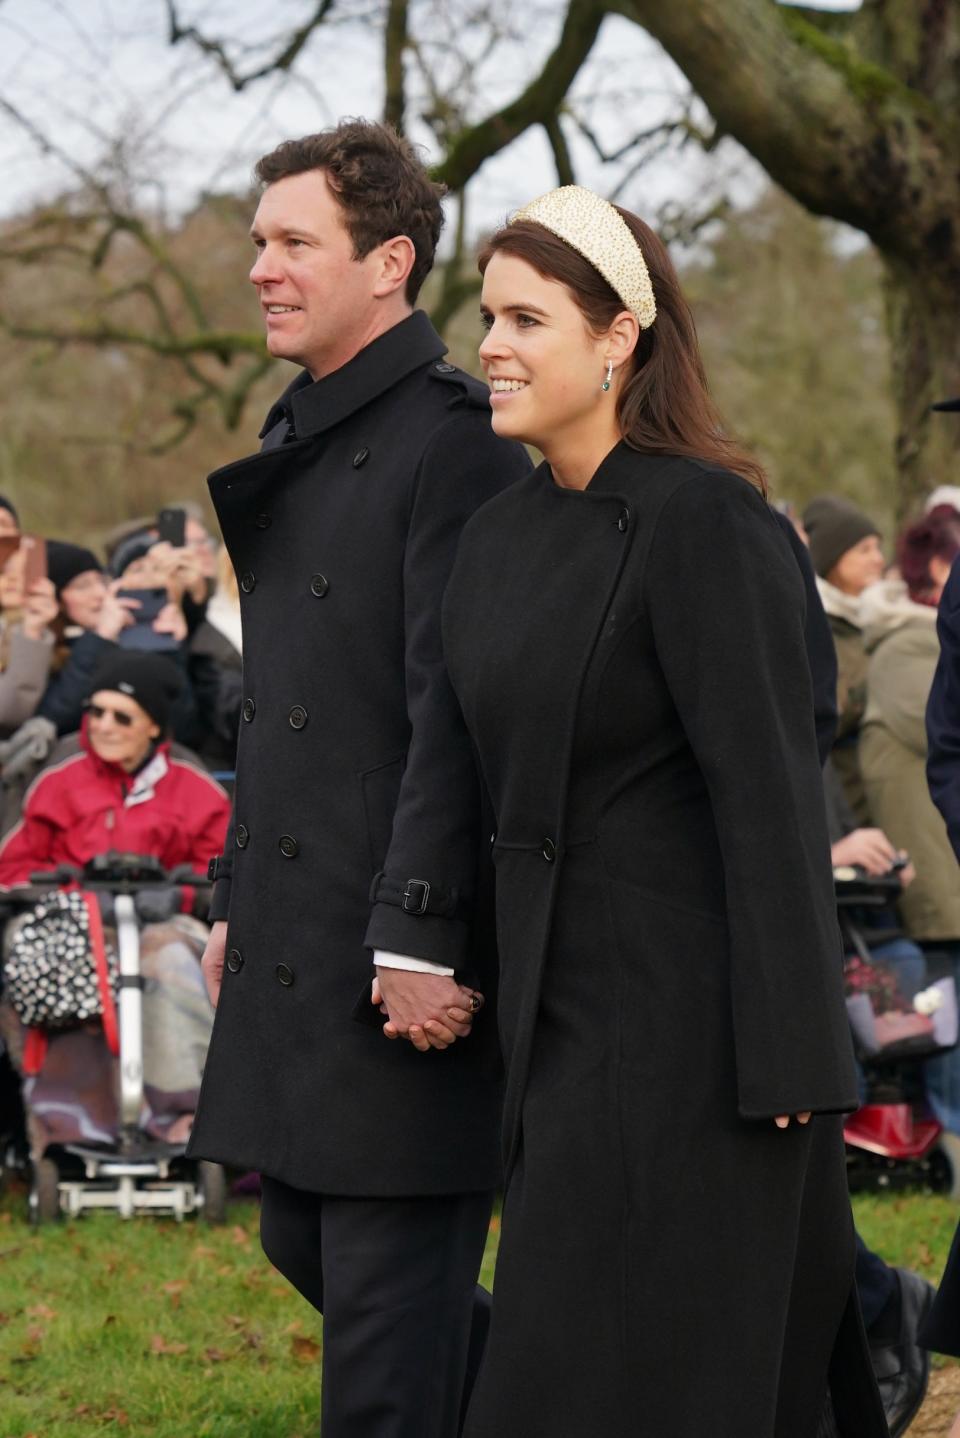 ack Brooksbank and Princess Eugenie attending the Christmas Day morning church service at St Mary Magdalene Church in Sandringham, Norfolk (Joe Giddens/PA Wire)